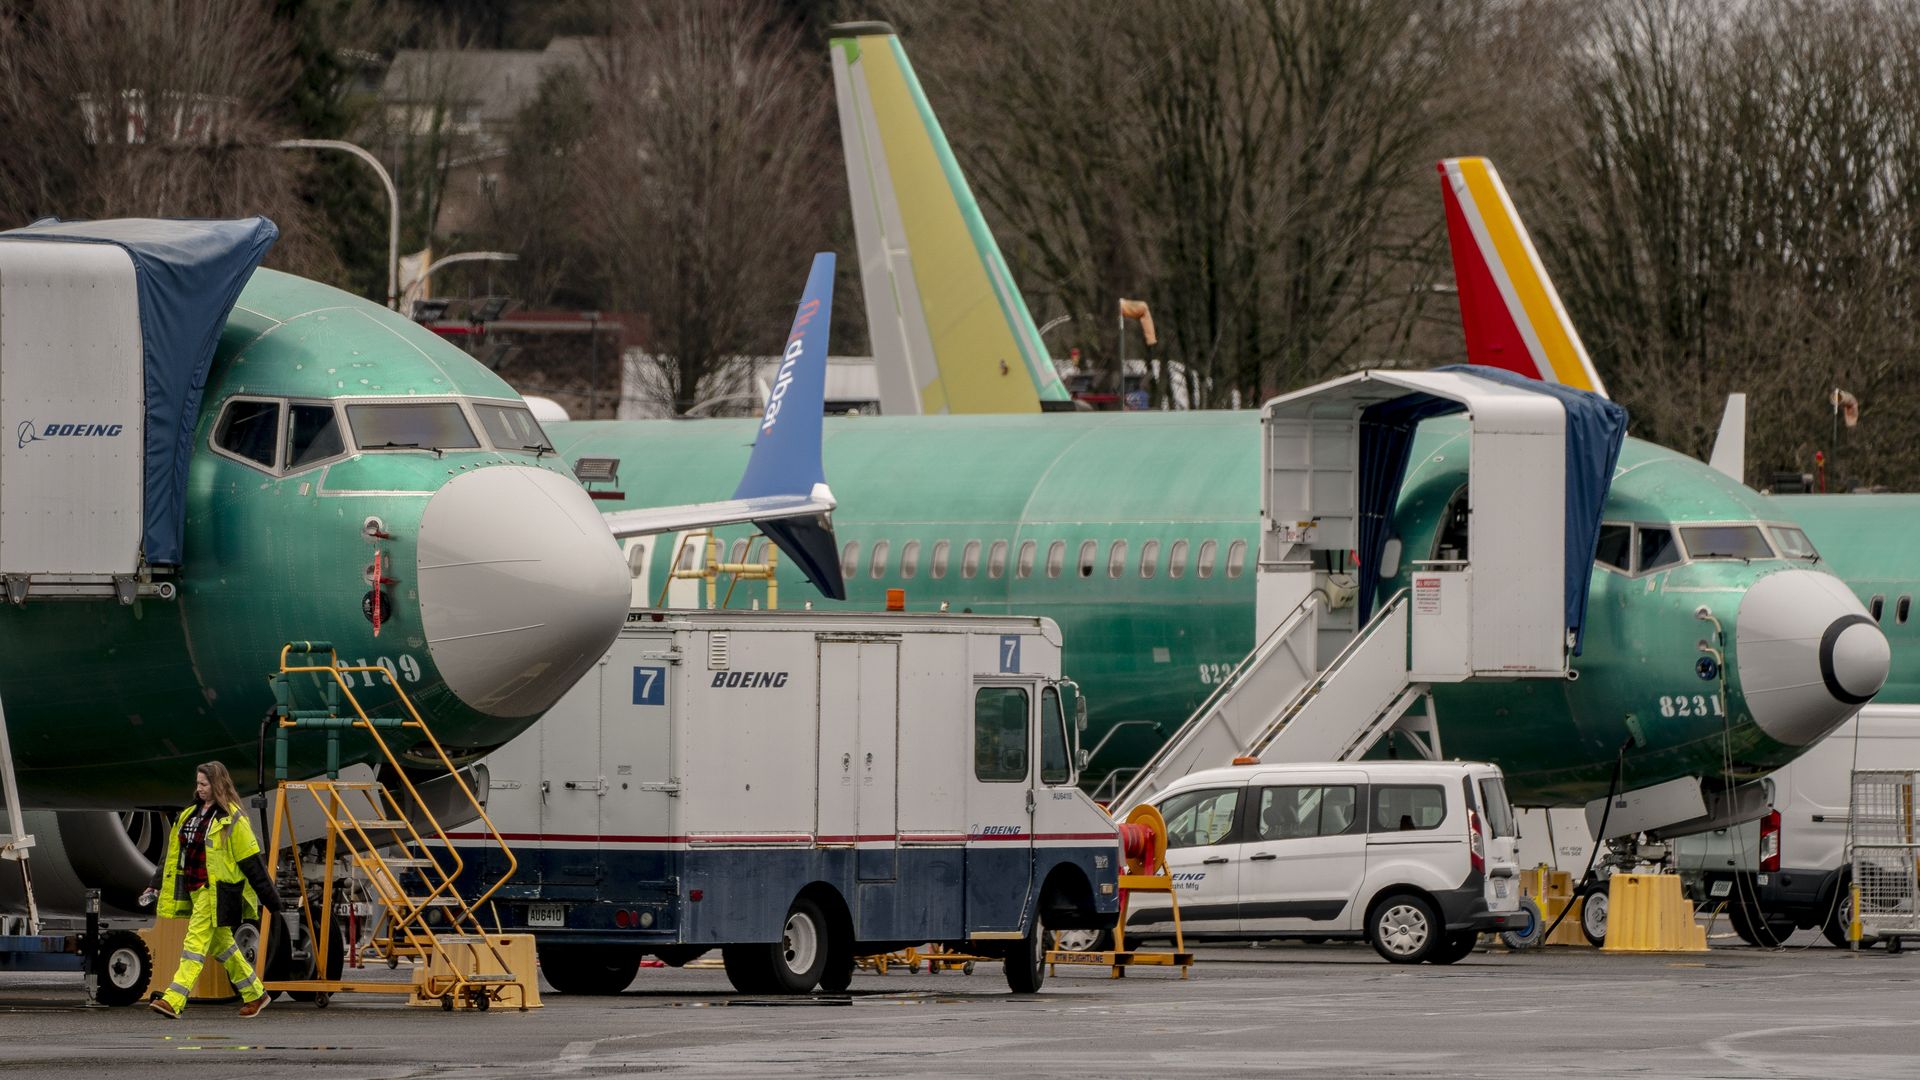 Boeing Co. 737 Max airplanes outside the company's manufacturing facility in Renton, Washington, U.S., on Monday, March 21, 2022